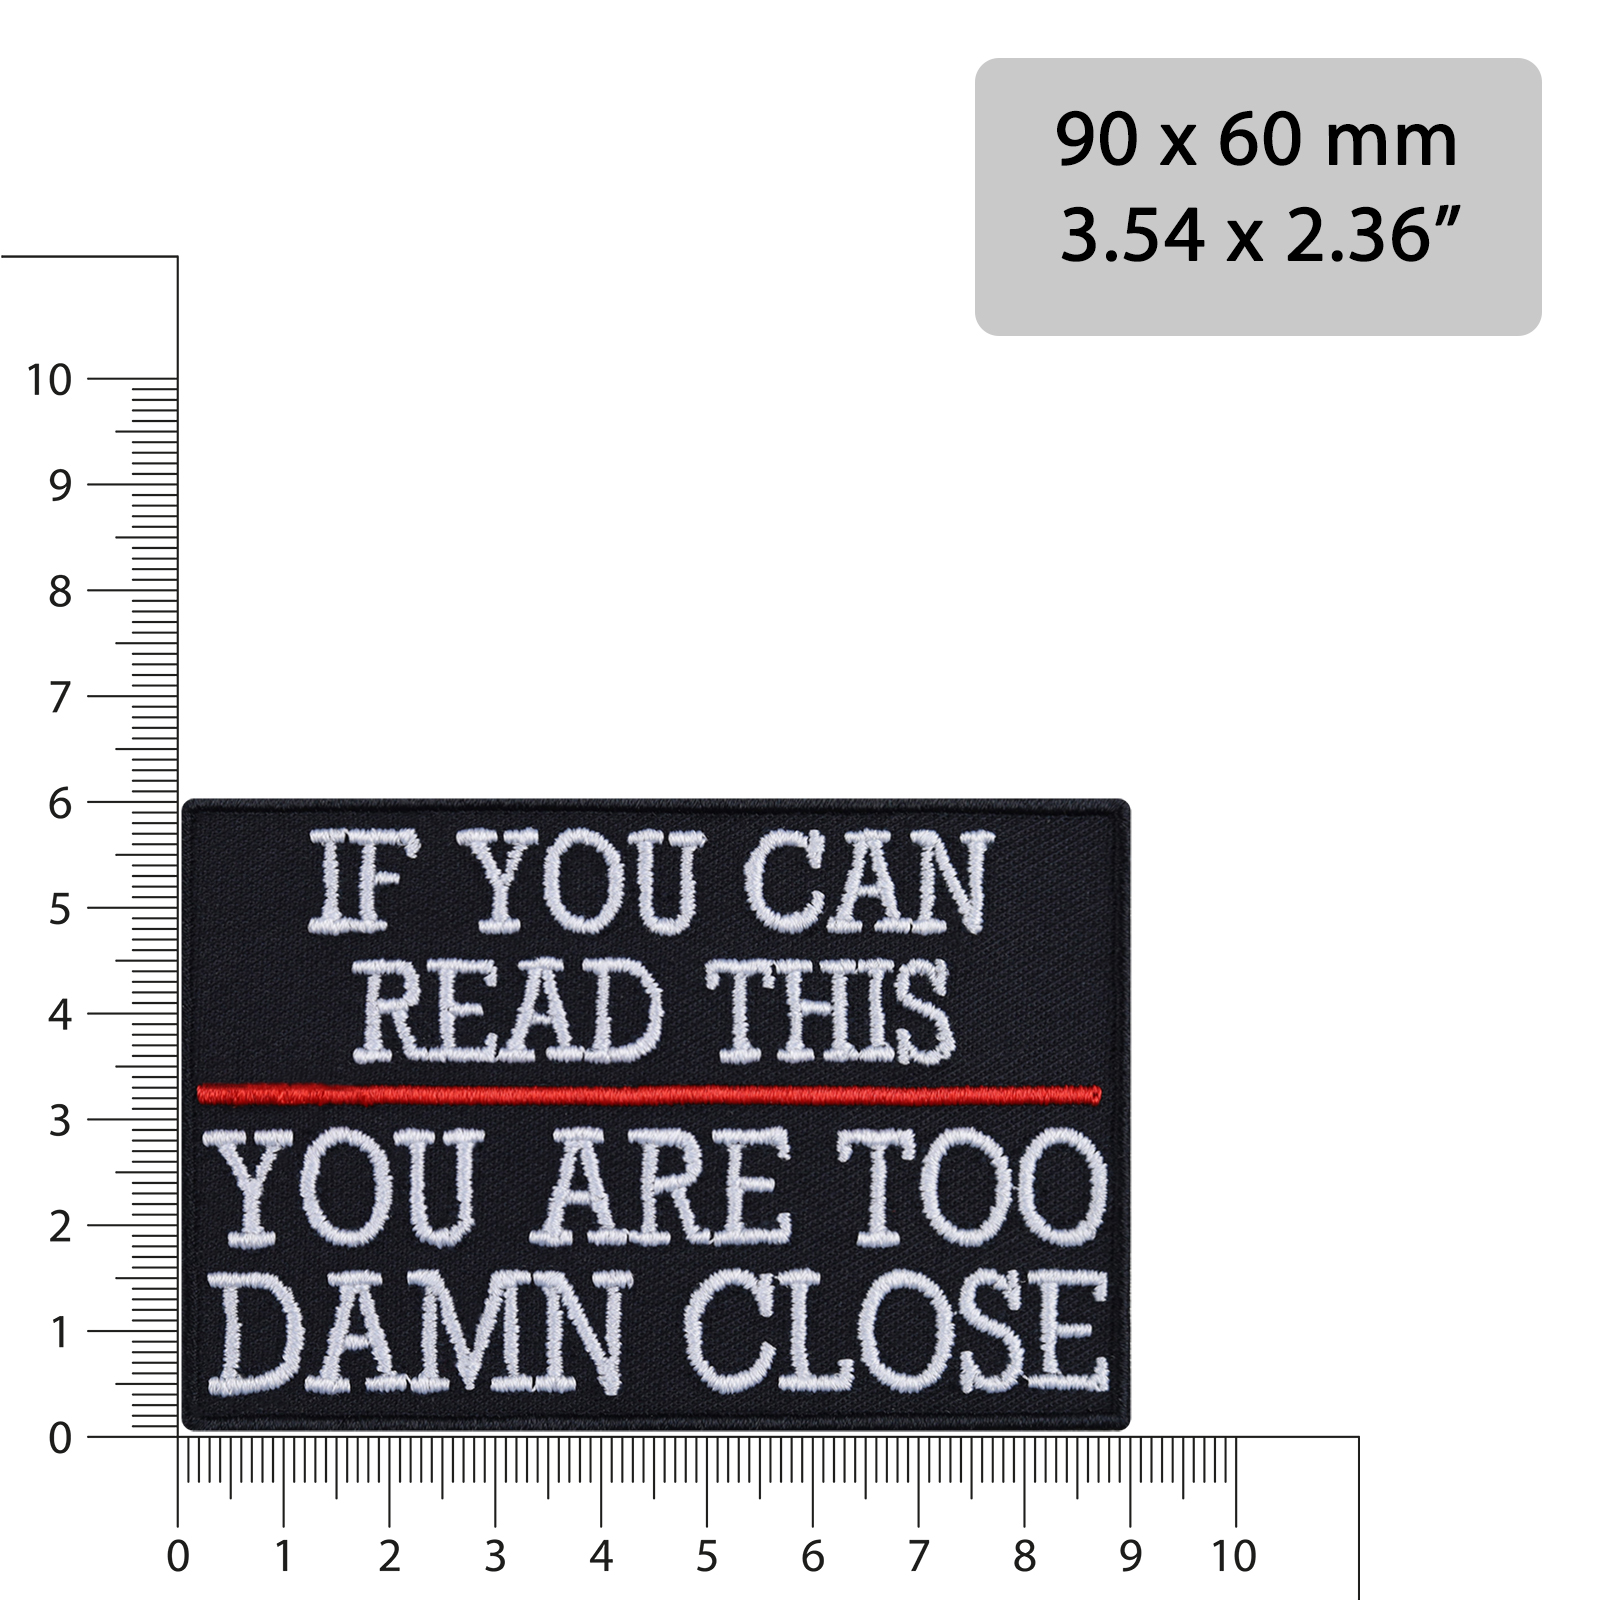 If you can read this, you are too damn close - Patch